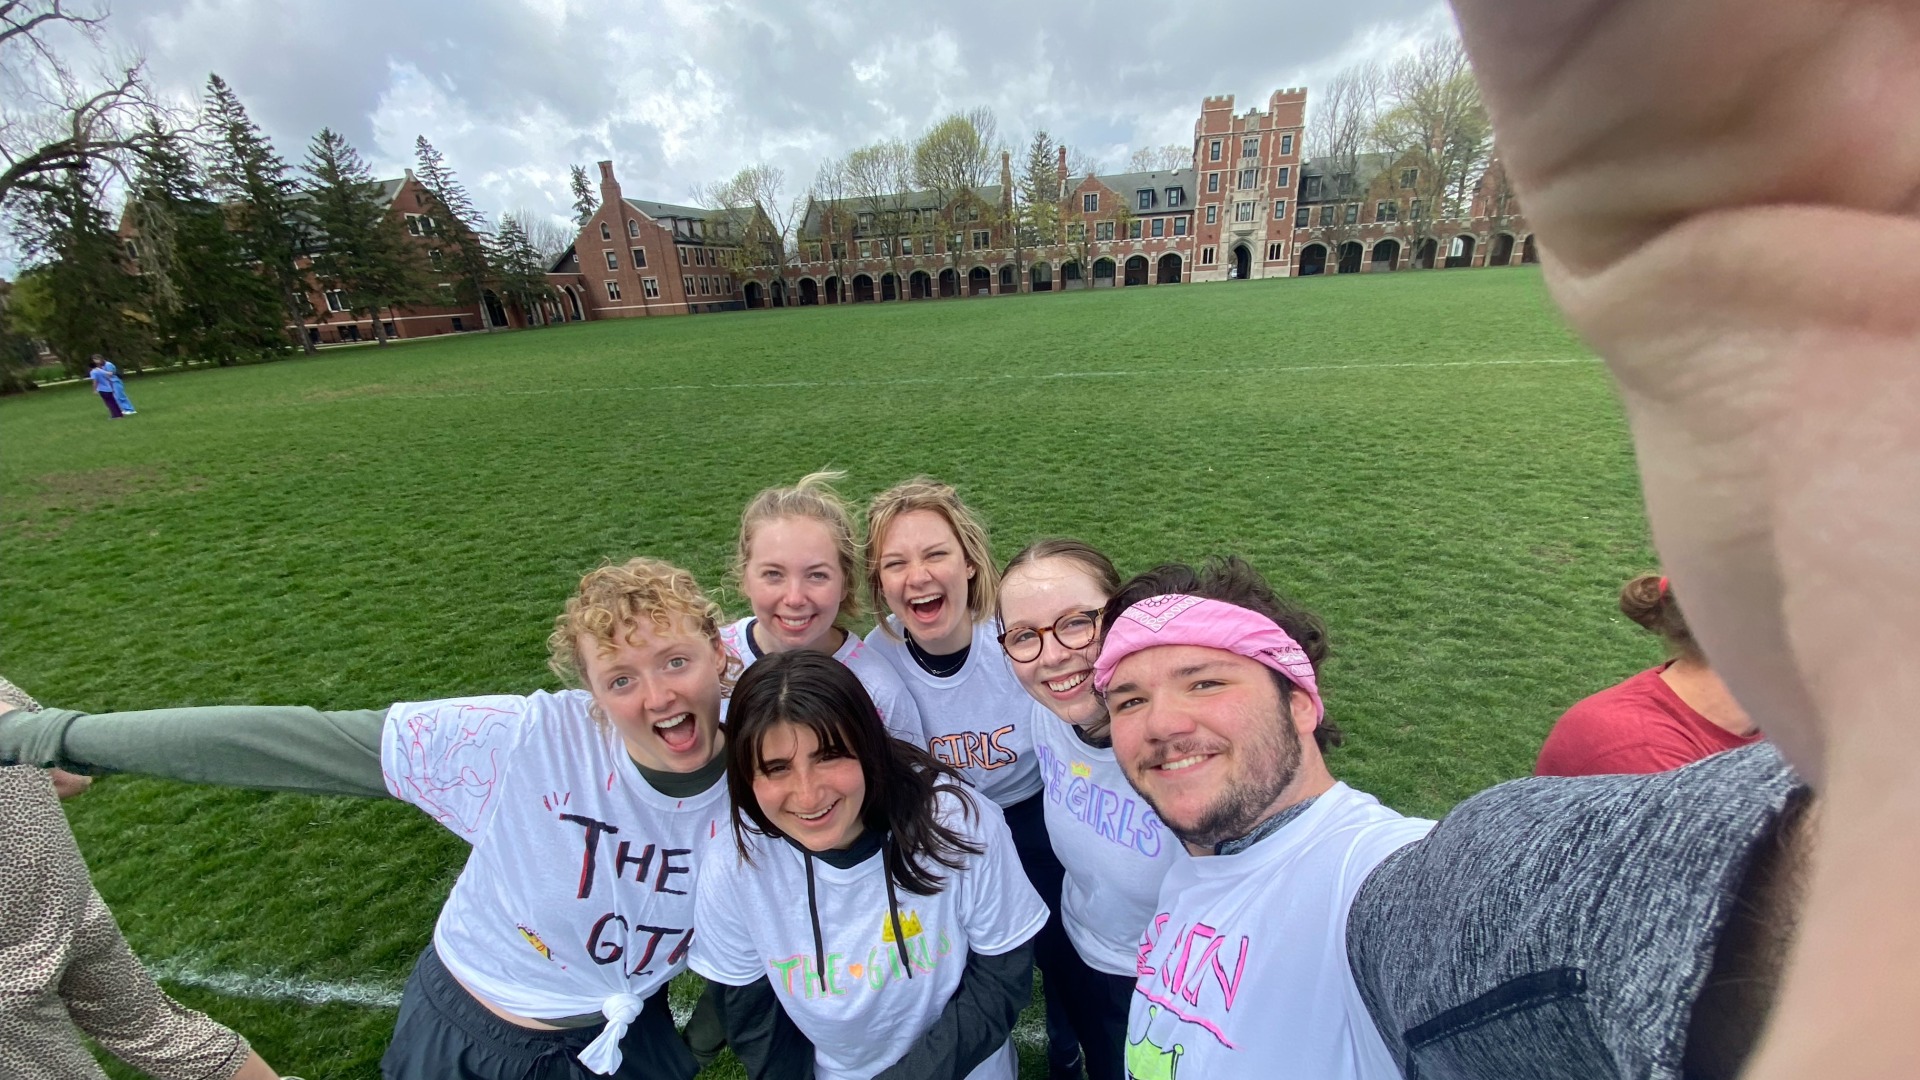 My friends and I huddle together in matching T-shirts for a selfie. You can see the Gates Tower (a residential hall building) in the background